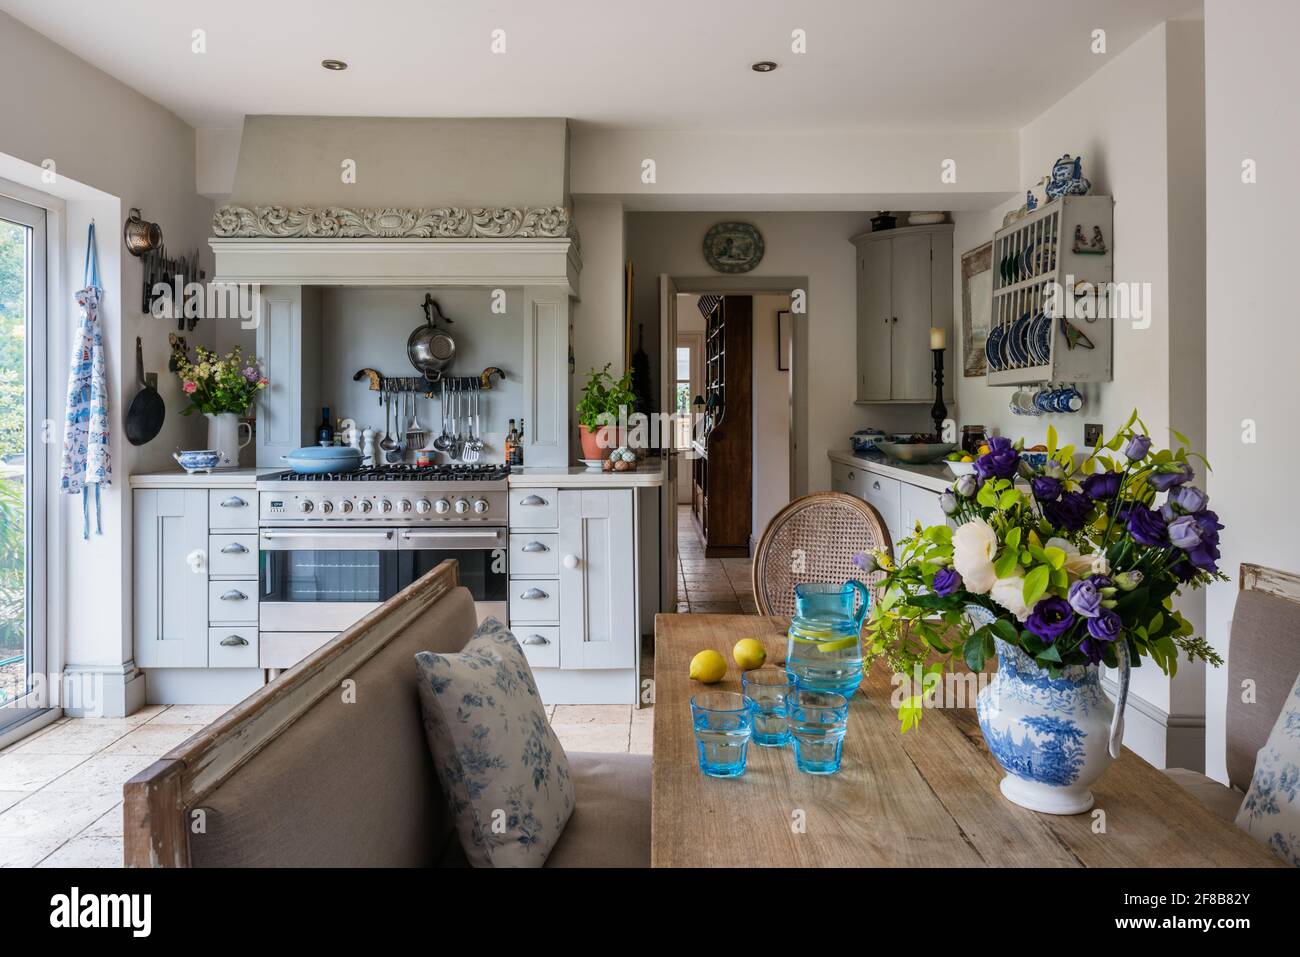 Shaker style kitchen with Gustavian benches and Travertine floor in 1930s West Sussex coastal kitchen redesign. Stock Photo